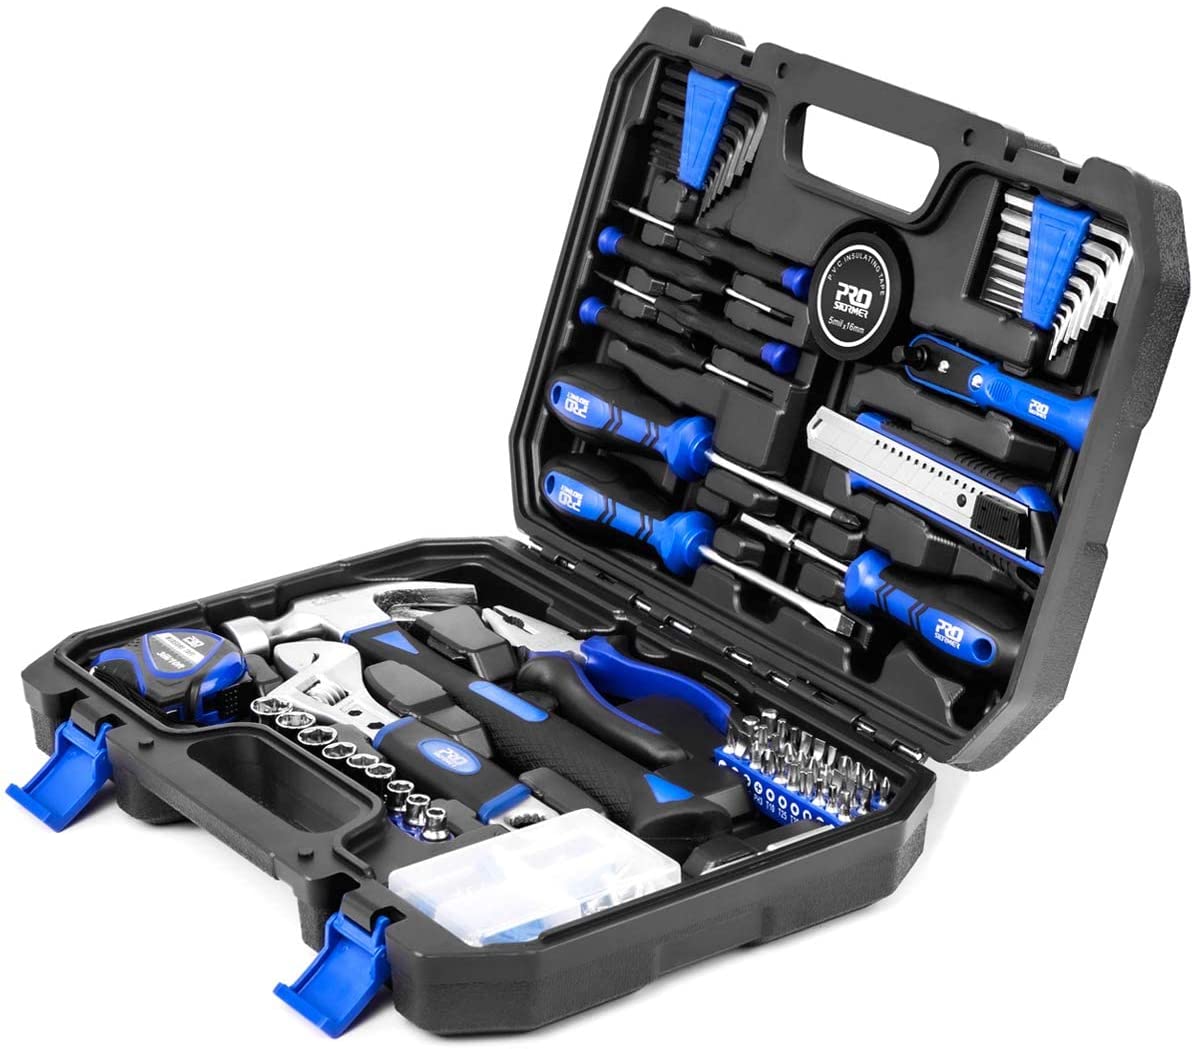 120-Piece Home Repair Tool Set, PROSTORMER General Household Hand Tool Kit with Tool Box Storage Case for Apartment, Garage, Dorm and Office - image 1 of 8